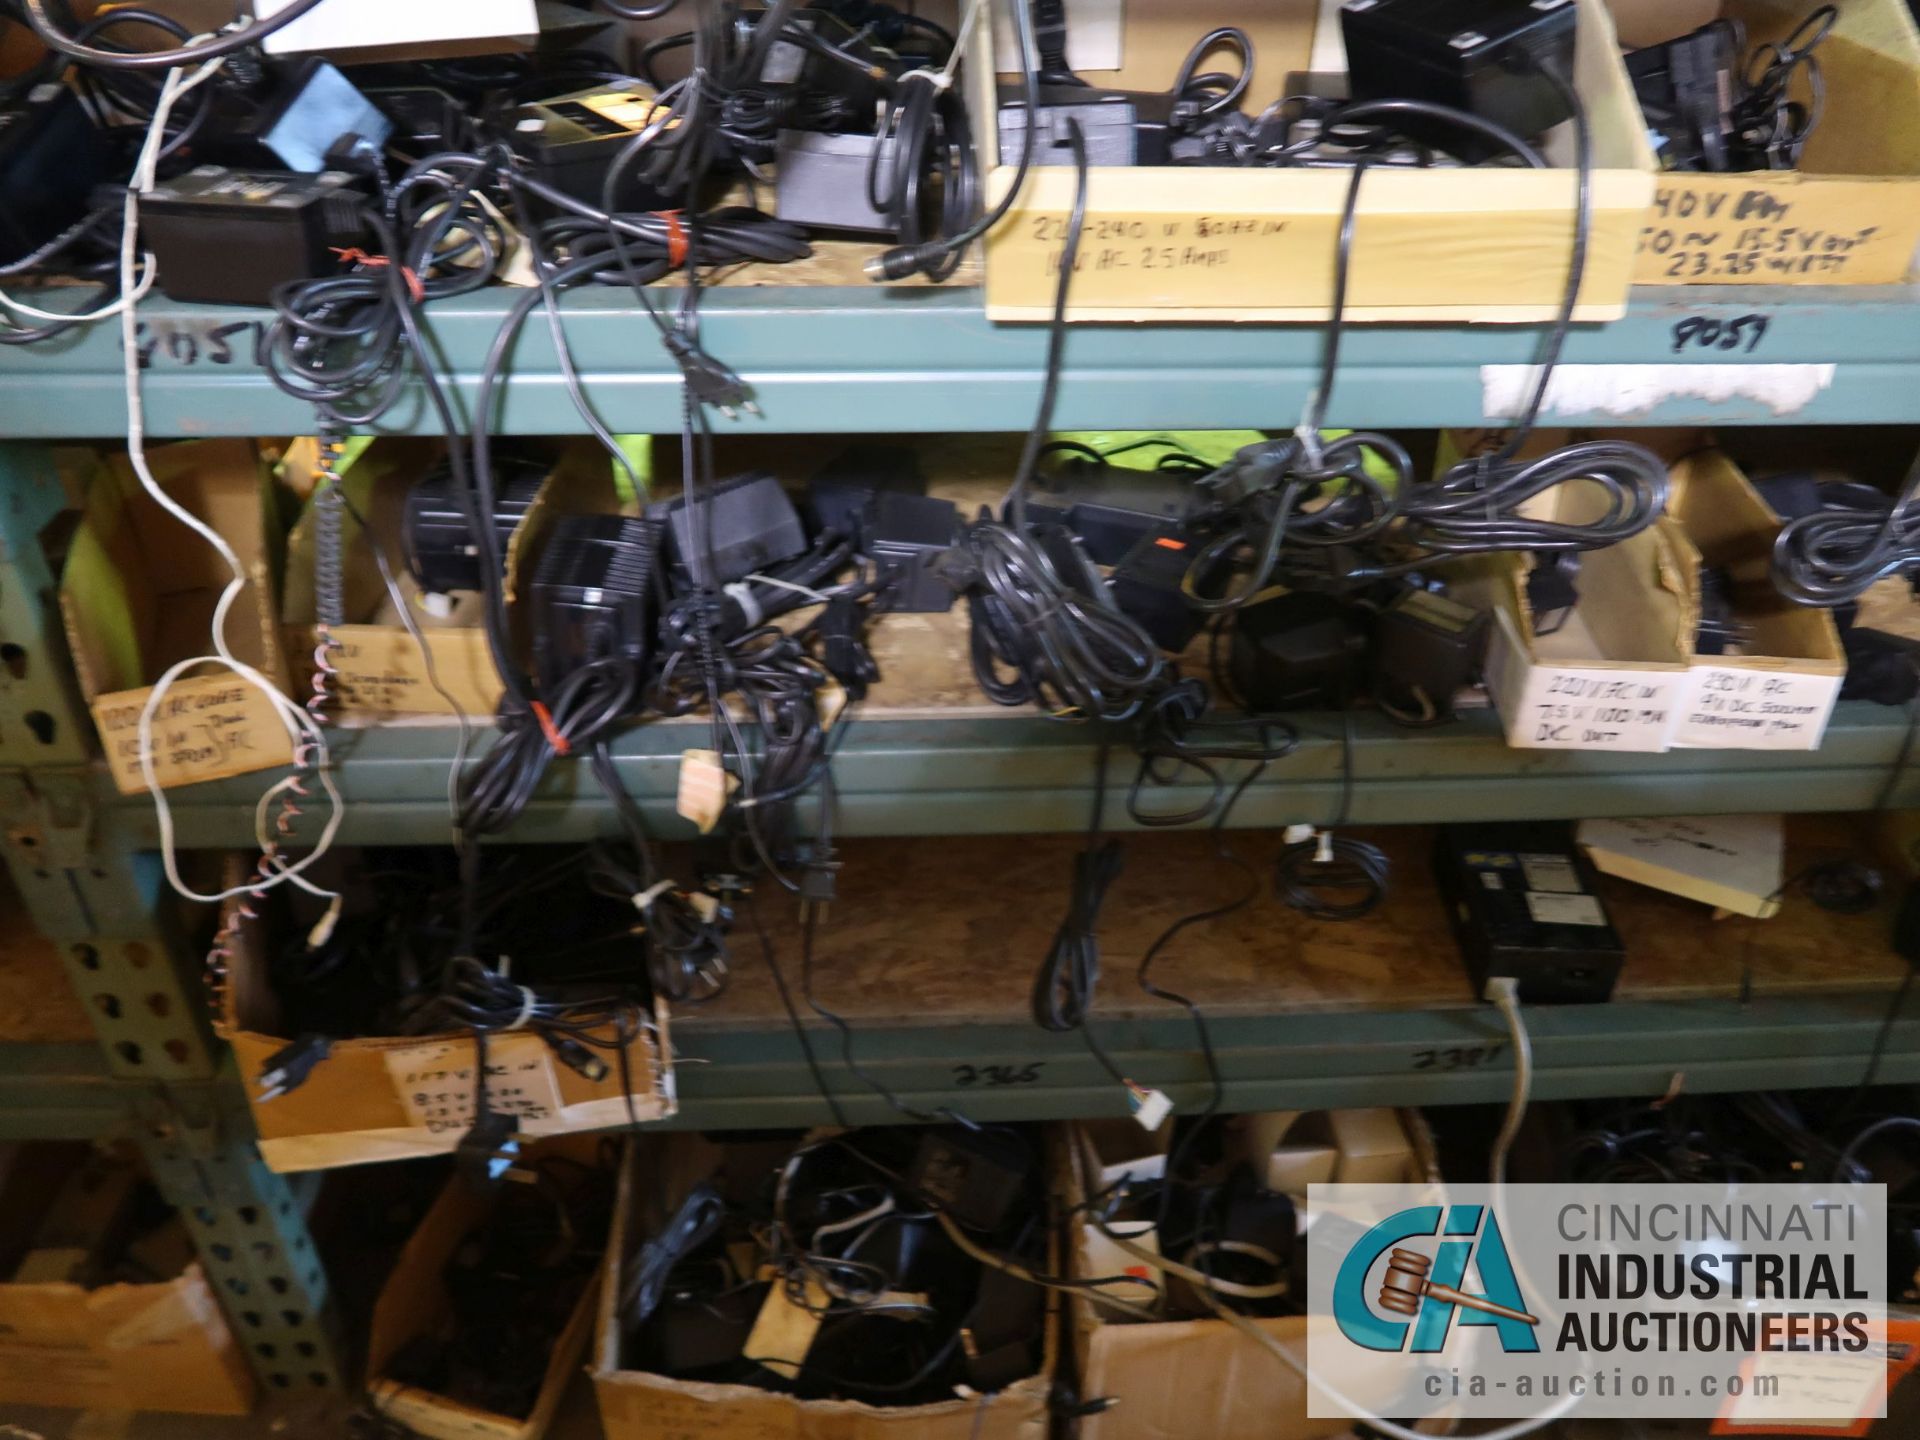 CONTENTS OF (5) RACKS INCLUDING MISCELLANEOUS POWER CORDS, BATTERY CHARGERS **NO RACKS** - Image 10 of 21